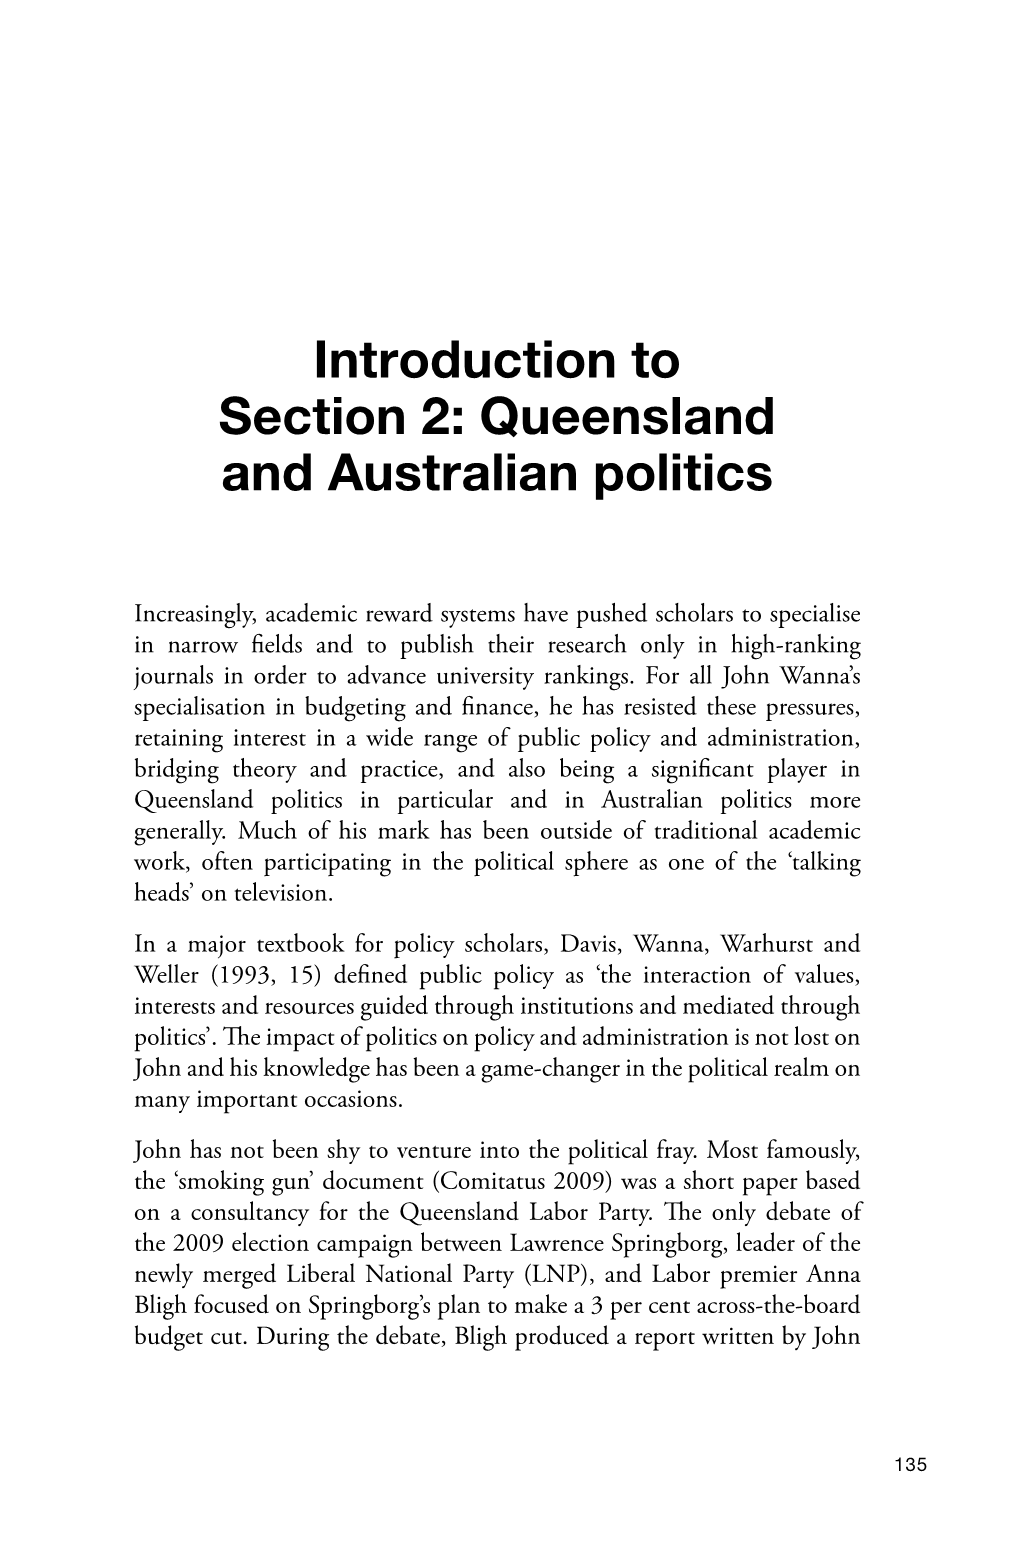 Introduction to Section 2: Queensland and Australian Politics